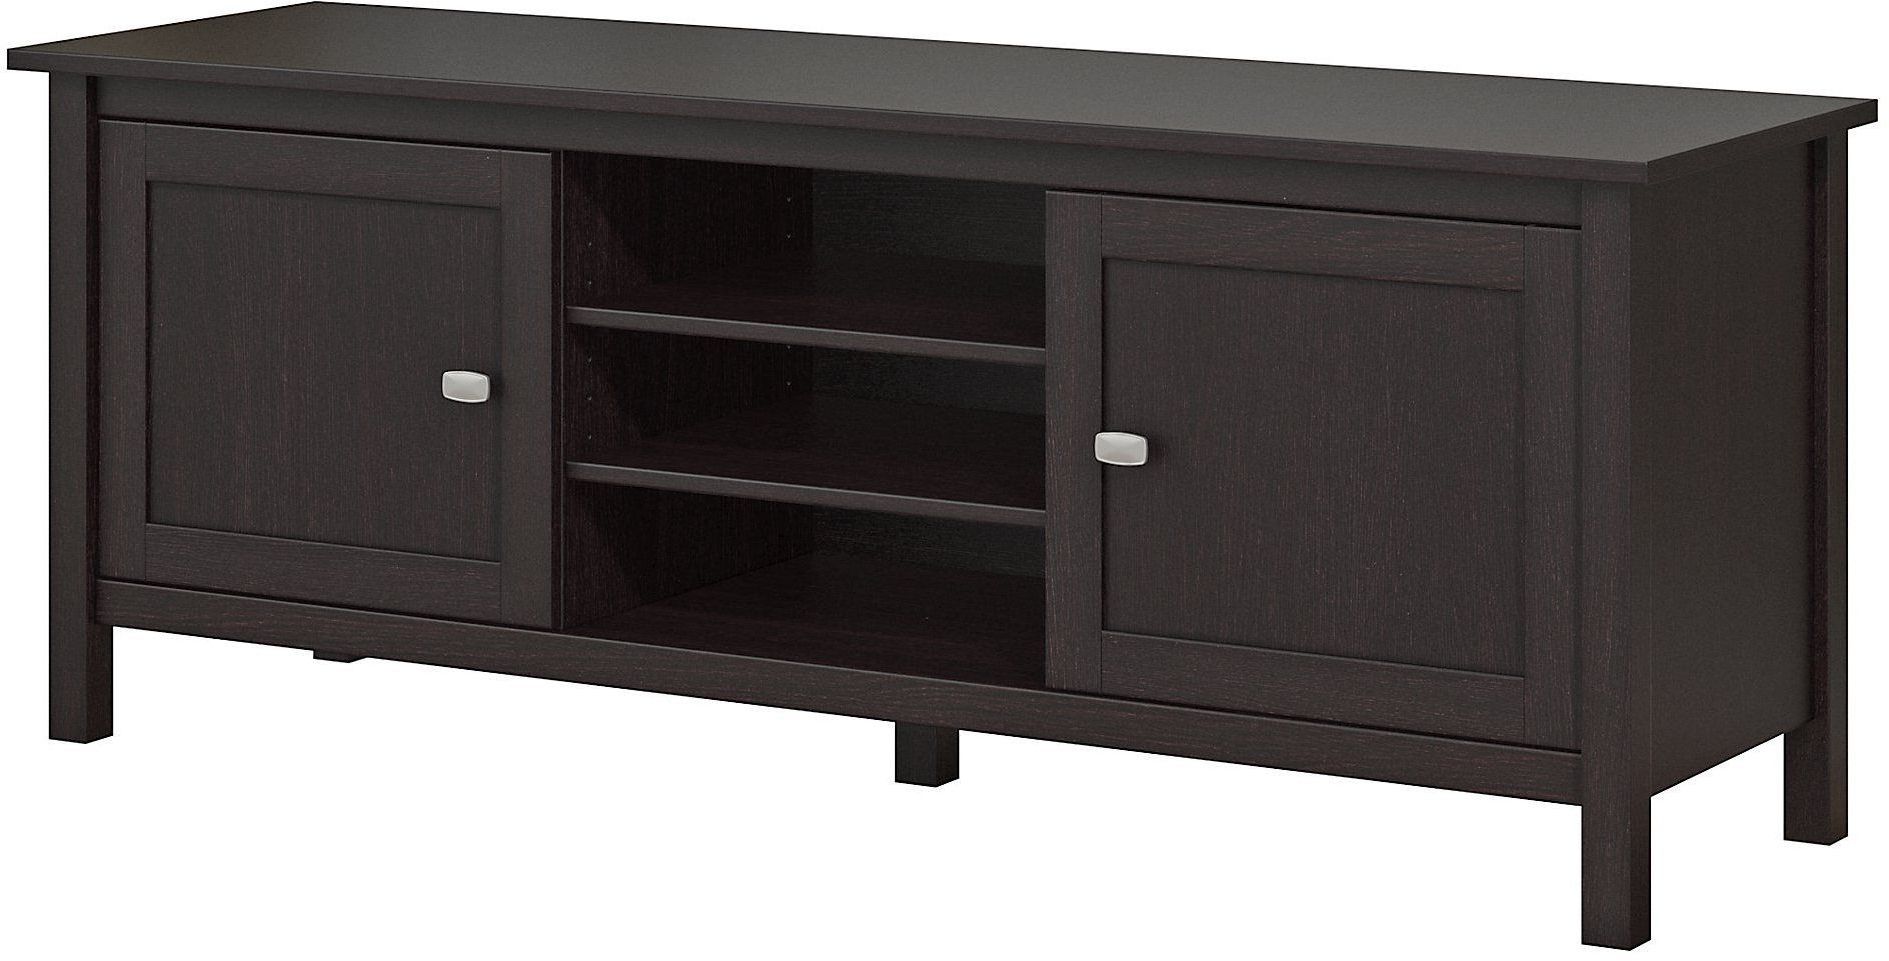 Latest Betton Tv Stands For Tvs Up To 65" With Broadview Espresso Oak 65" Tv Stand From Bush (View 17 of 25)